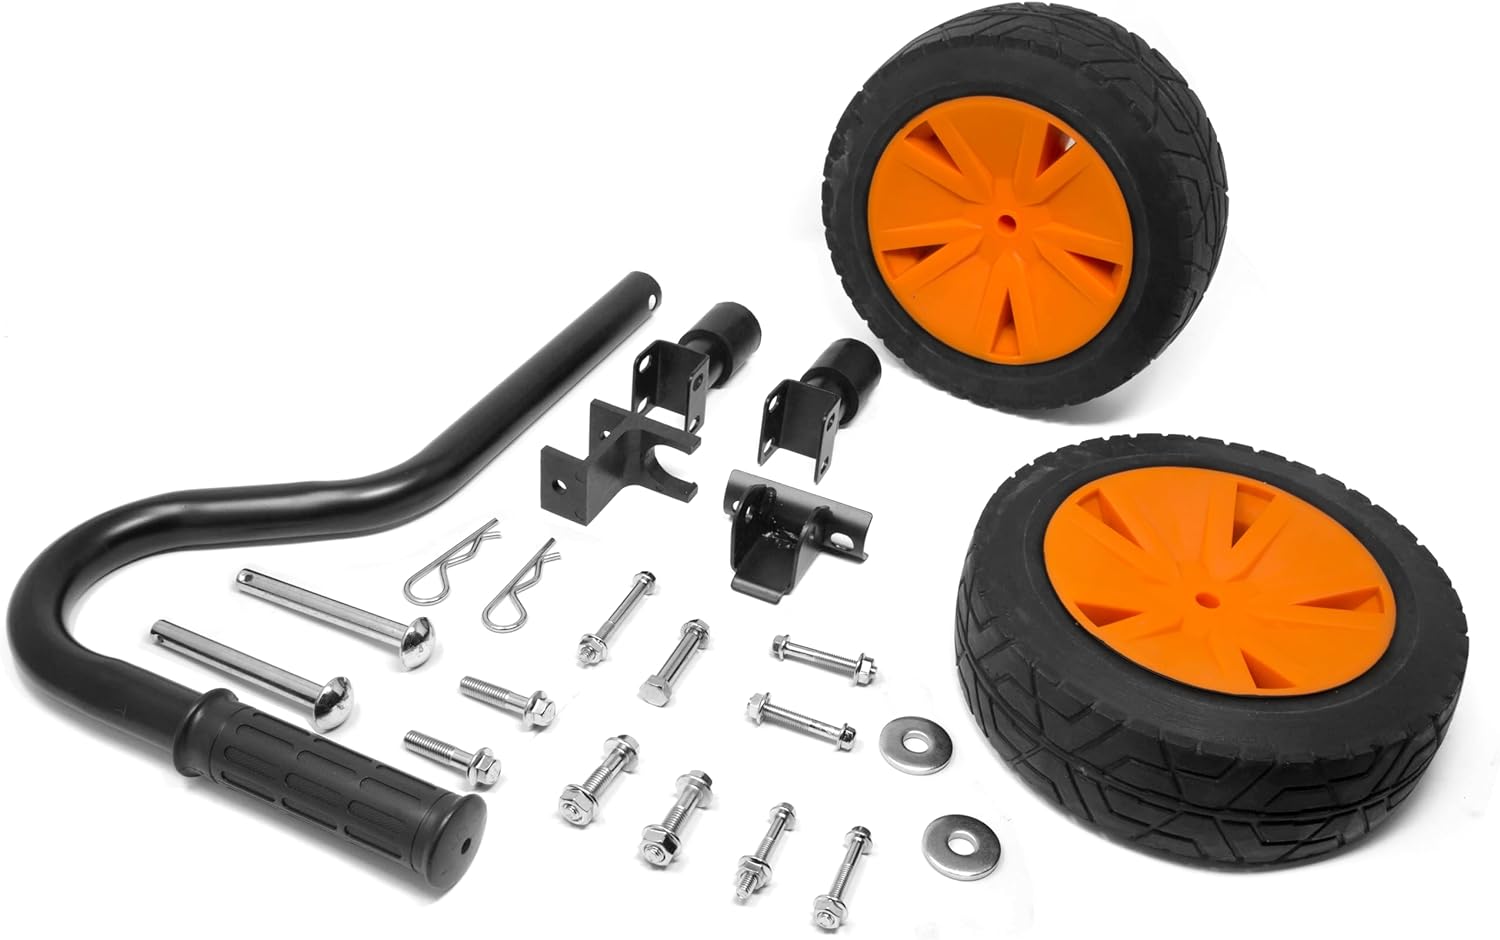 WEN GNA410 Generator Wheel and Handle Kit for WEN 4500 and 4750-Watt Generators (Black) - WEN GNA410 Generator Wheel Review